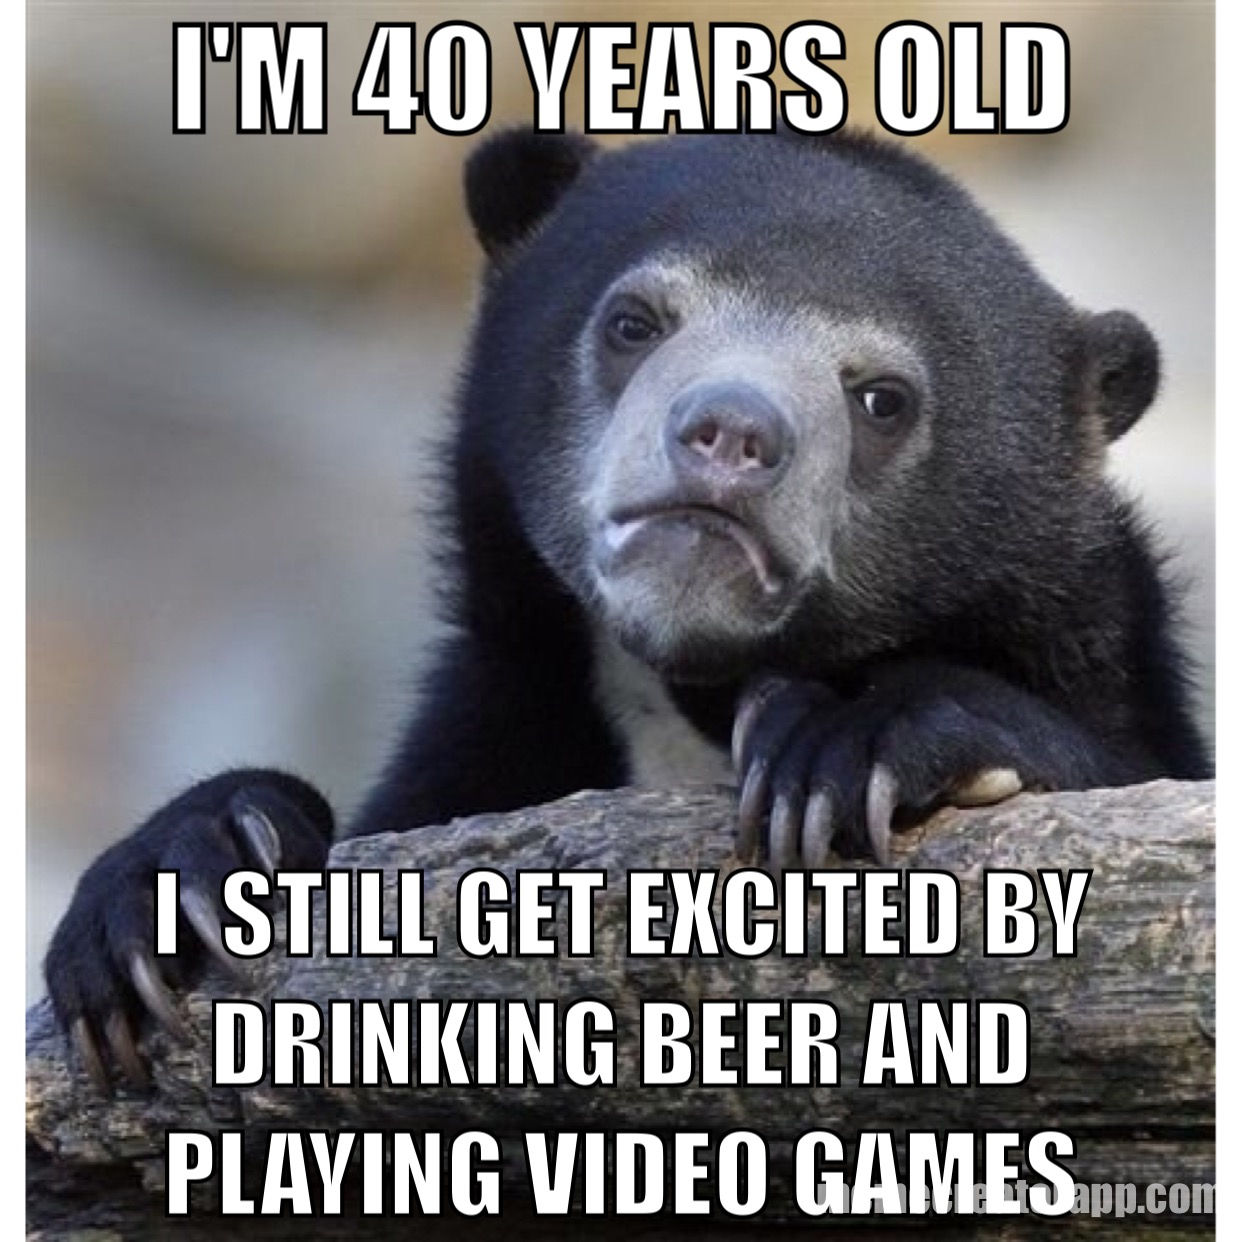 don t like surprises meme - I'M 40 Years Old I Still Get Excited By Drinking Beer And Playing Video Games.com